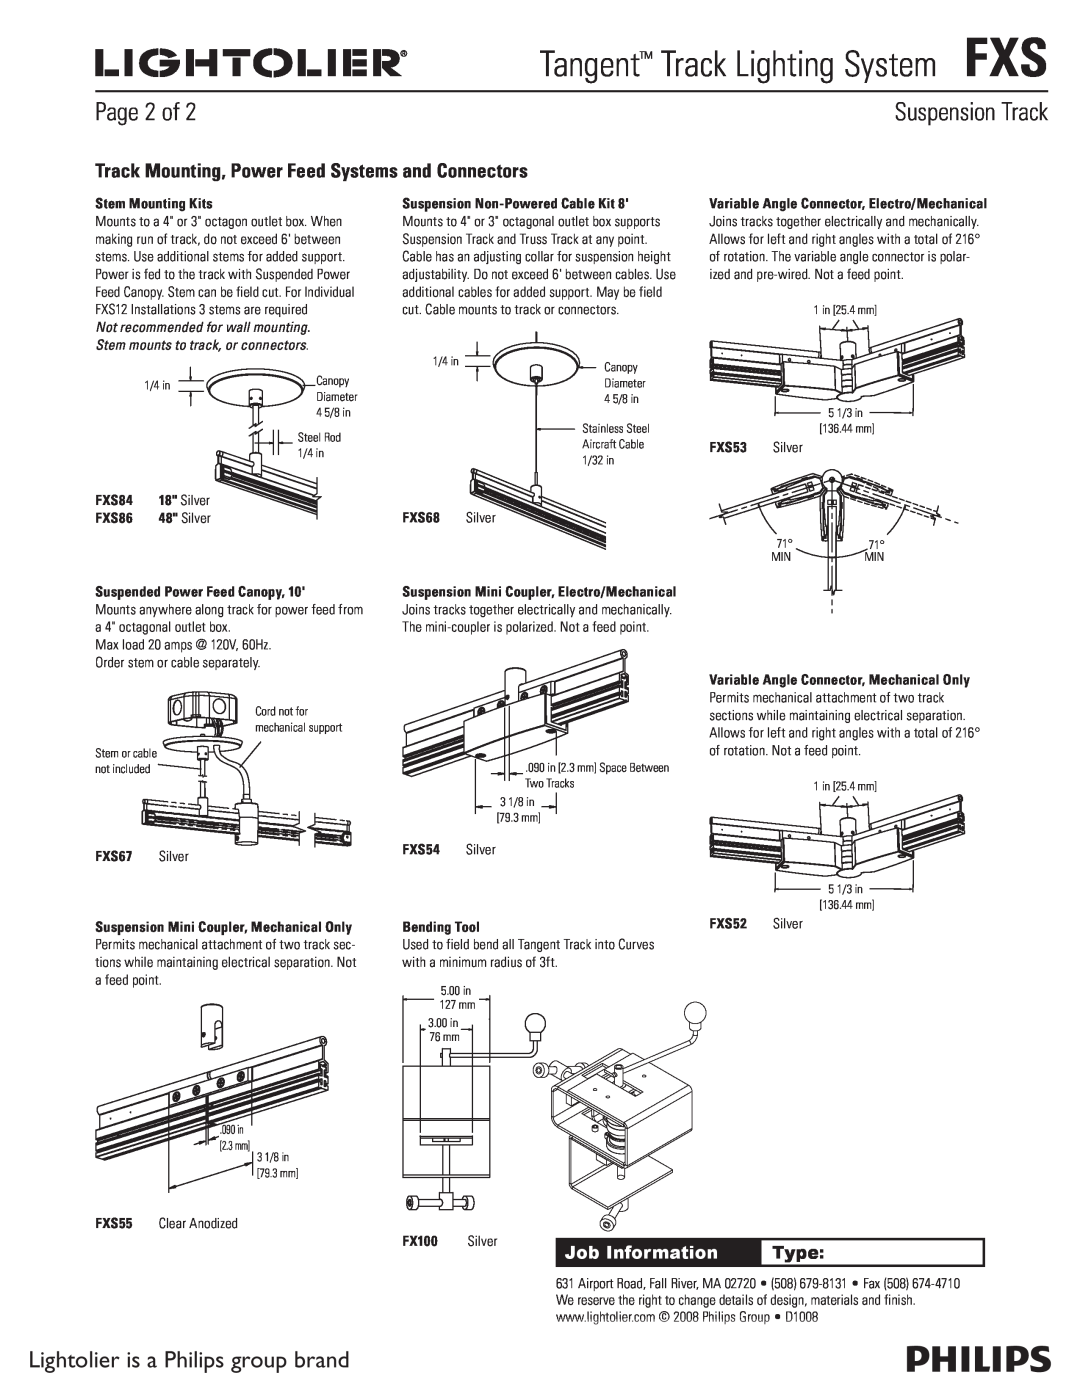 Lightolier FXS manual Suspension Track, Page 2 of, Track Mounting, Power Feed Systems and Connectors, Job Information, Type 